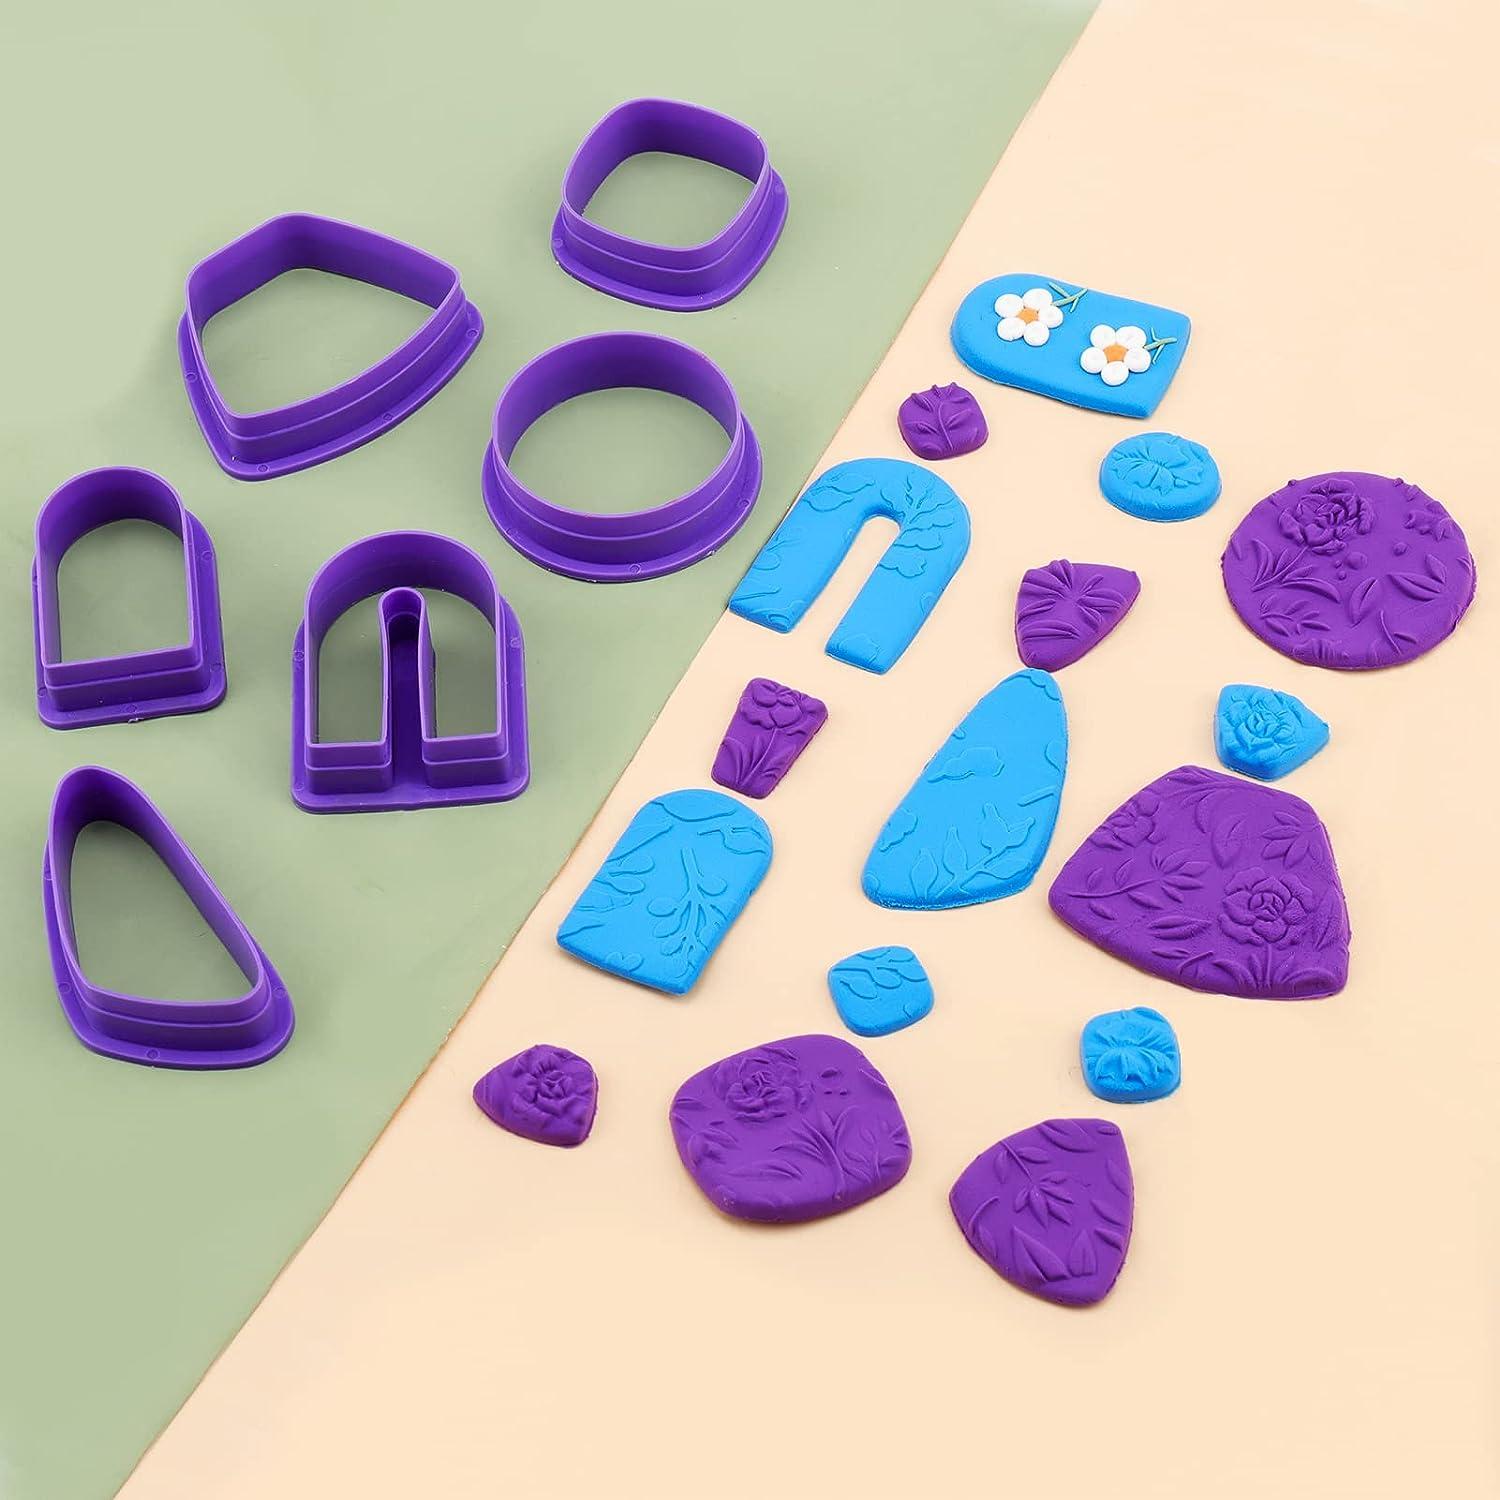 BABORUI 118Pcs Polymer Clay Cutters kit Set of 18 Clay Cutters